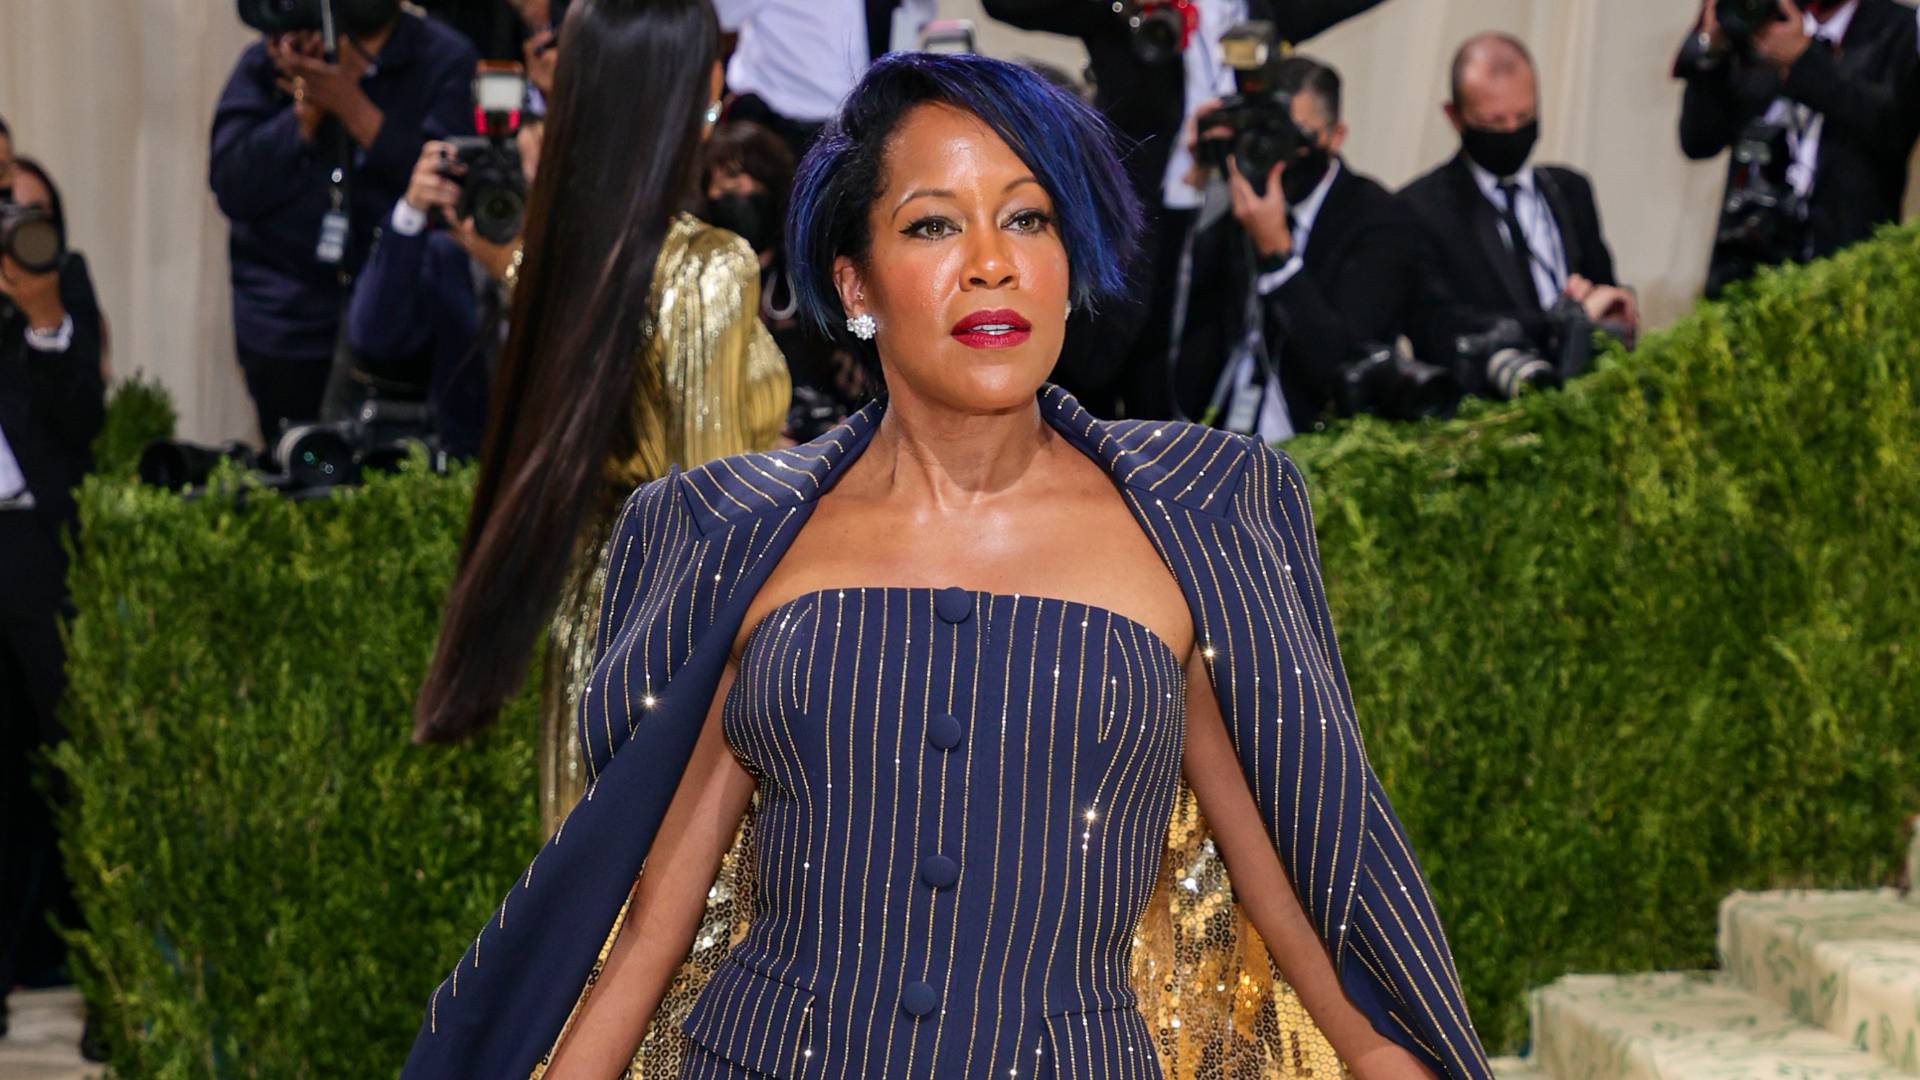 Regina King attends The 2021 Met Gala Celebrating In America: A Lexicon Of Fashion at Metropolitan Museum of Art on September 13, 2021 in New York City. 